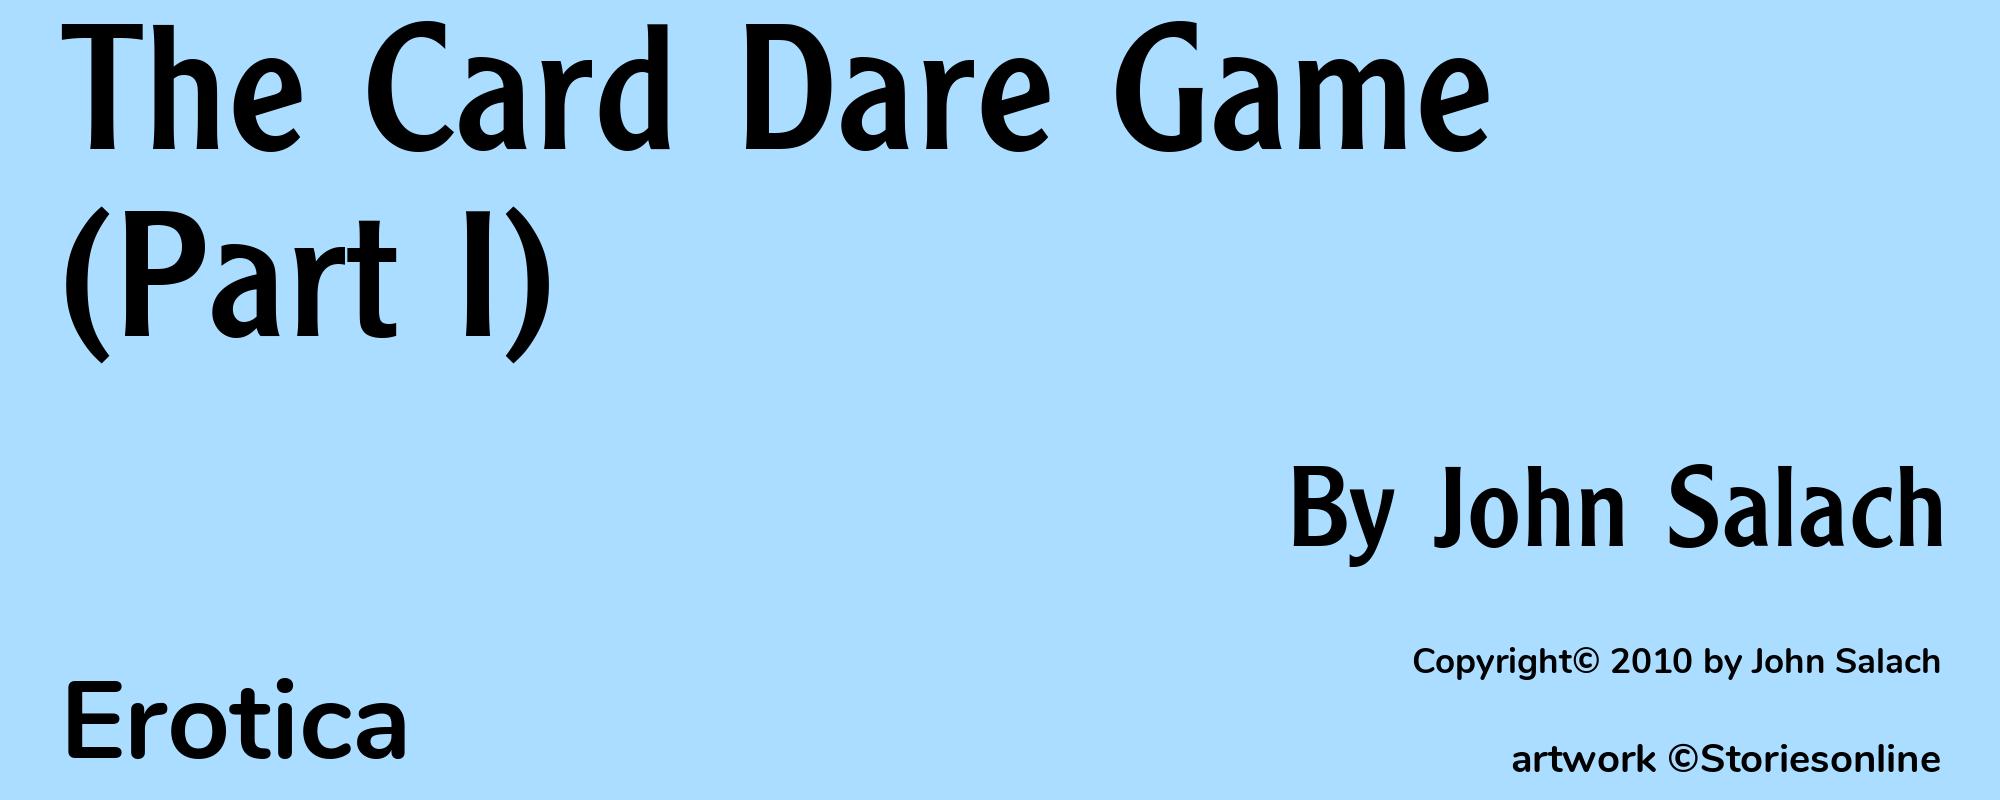 The Card Dare Game (Part I) - Cover